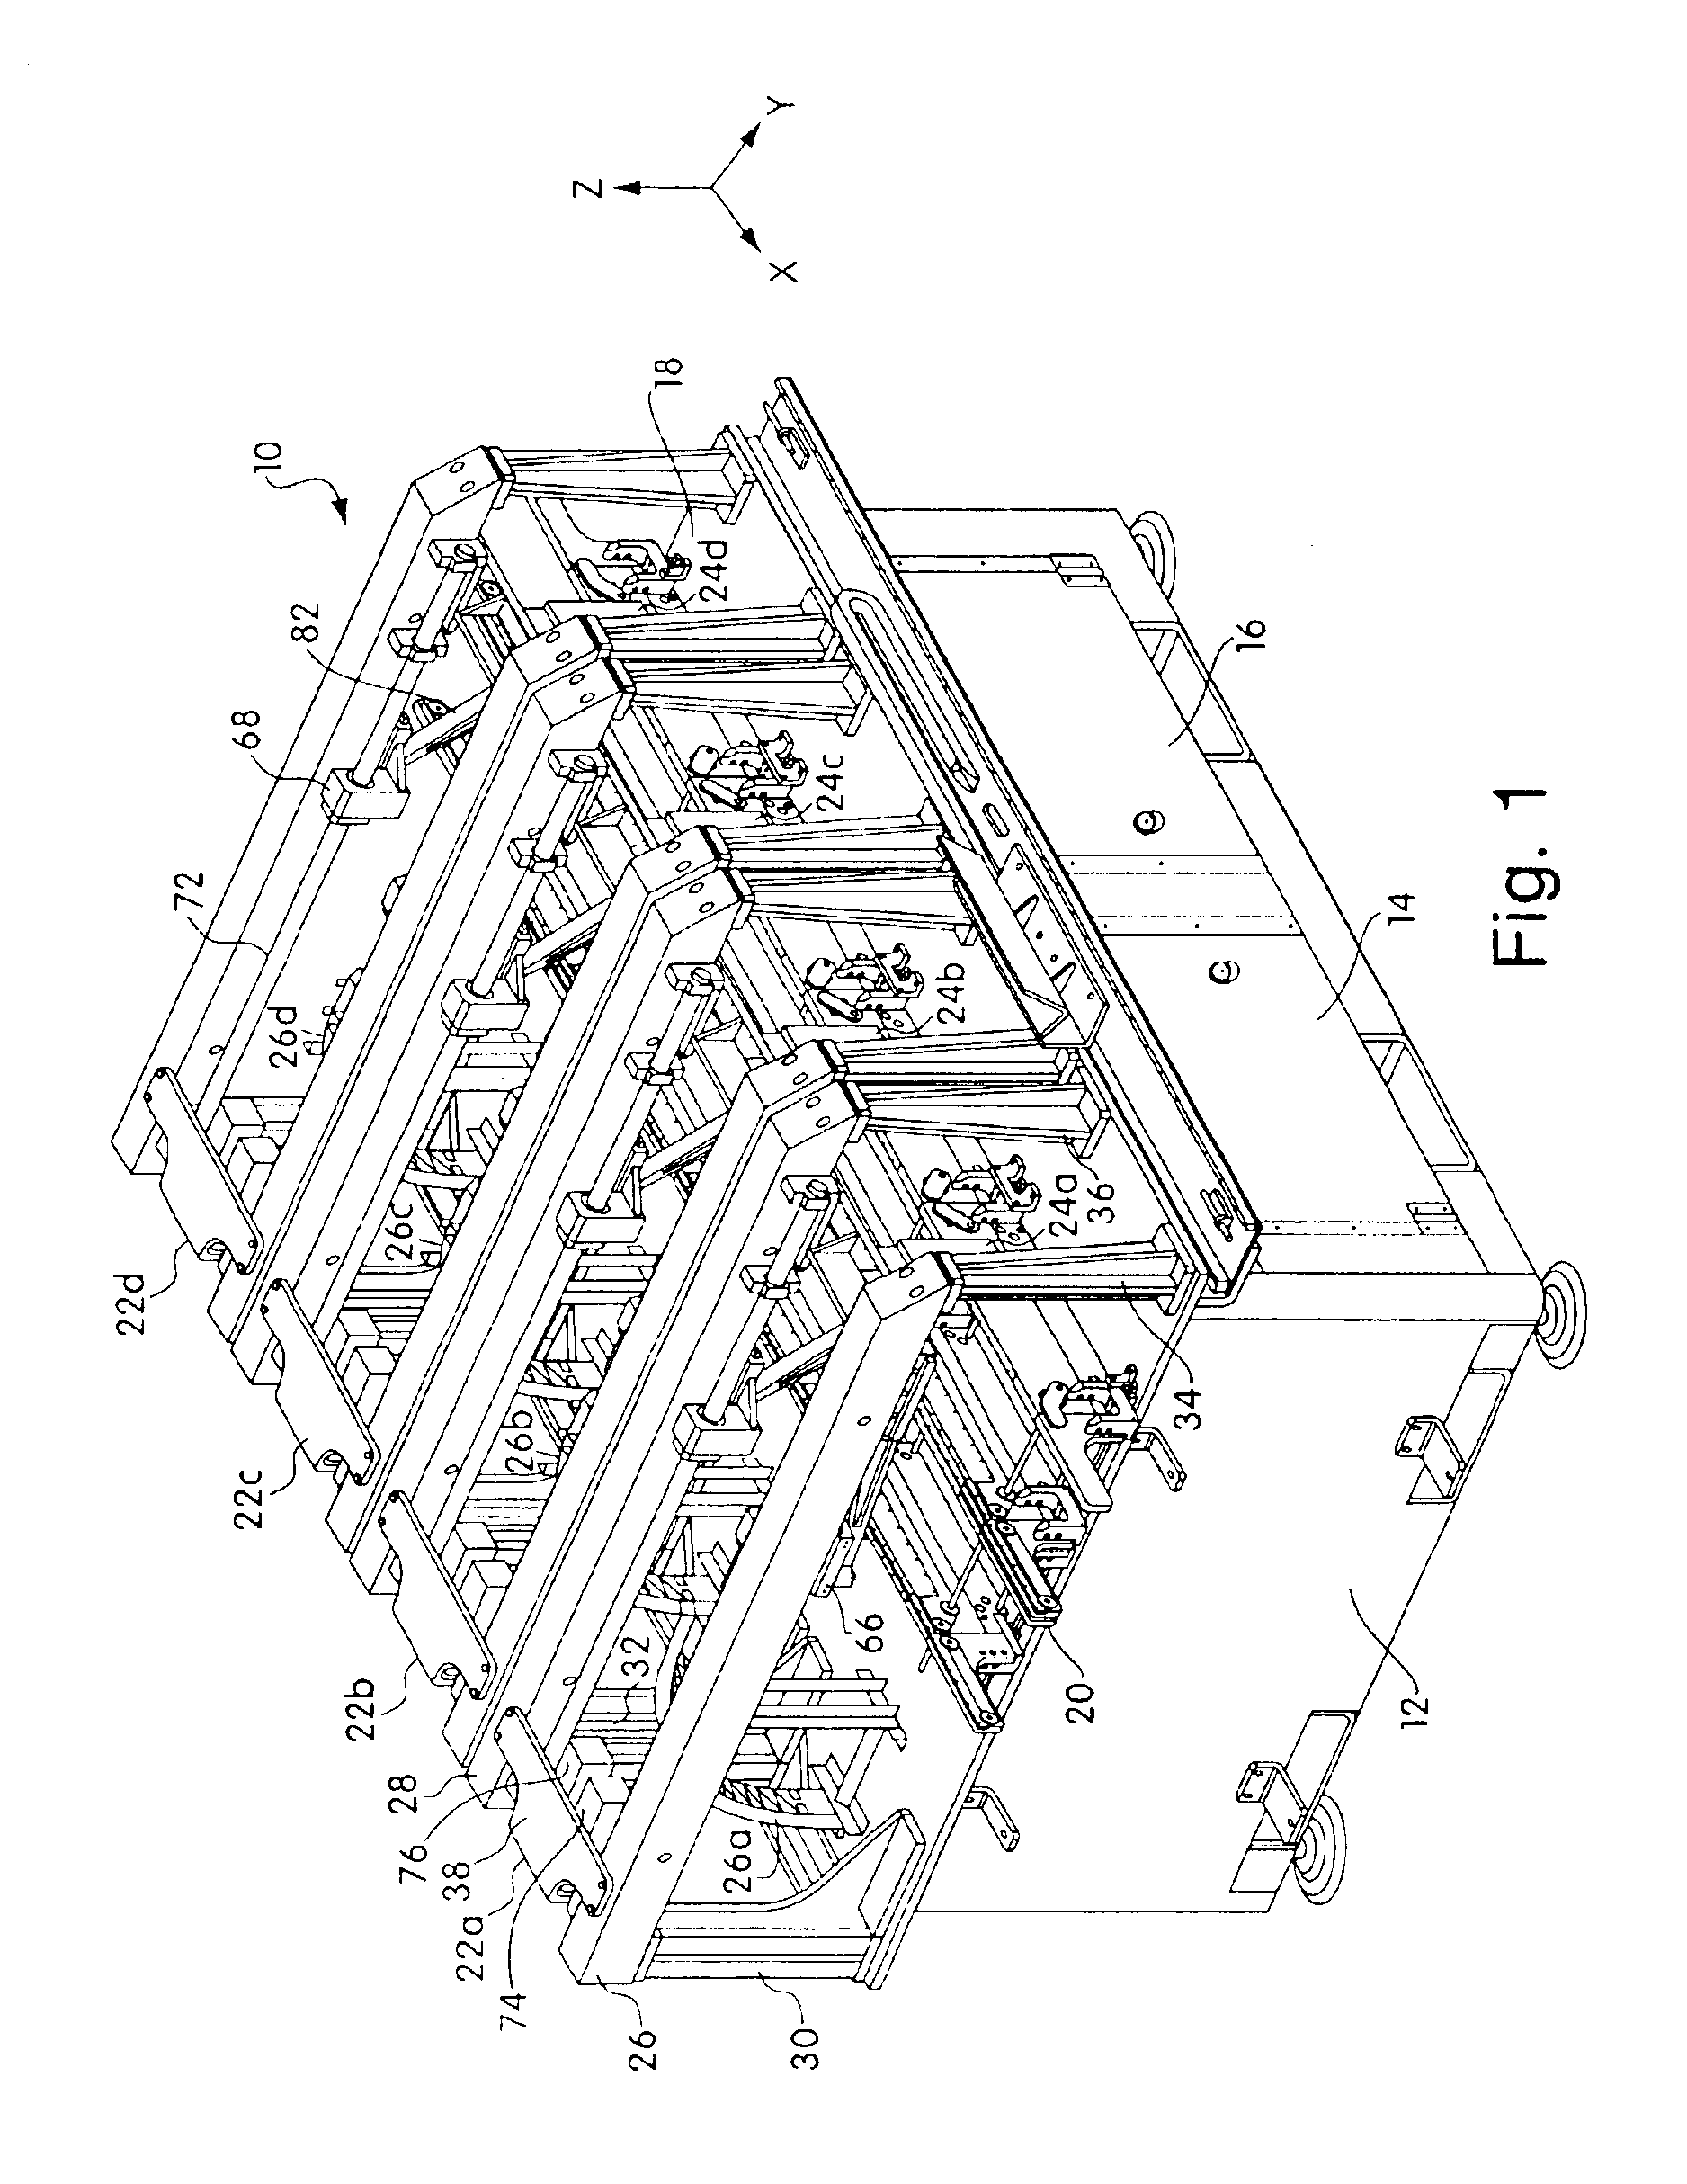 Dispensing system and method